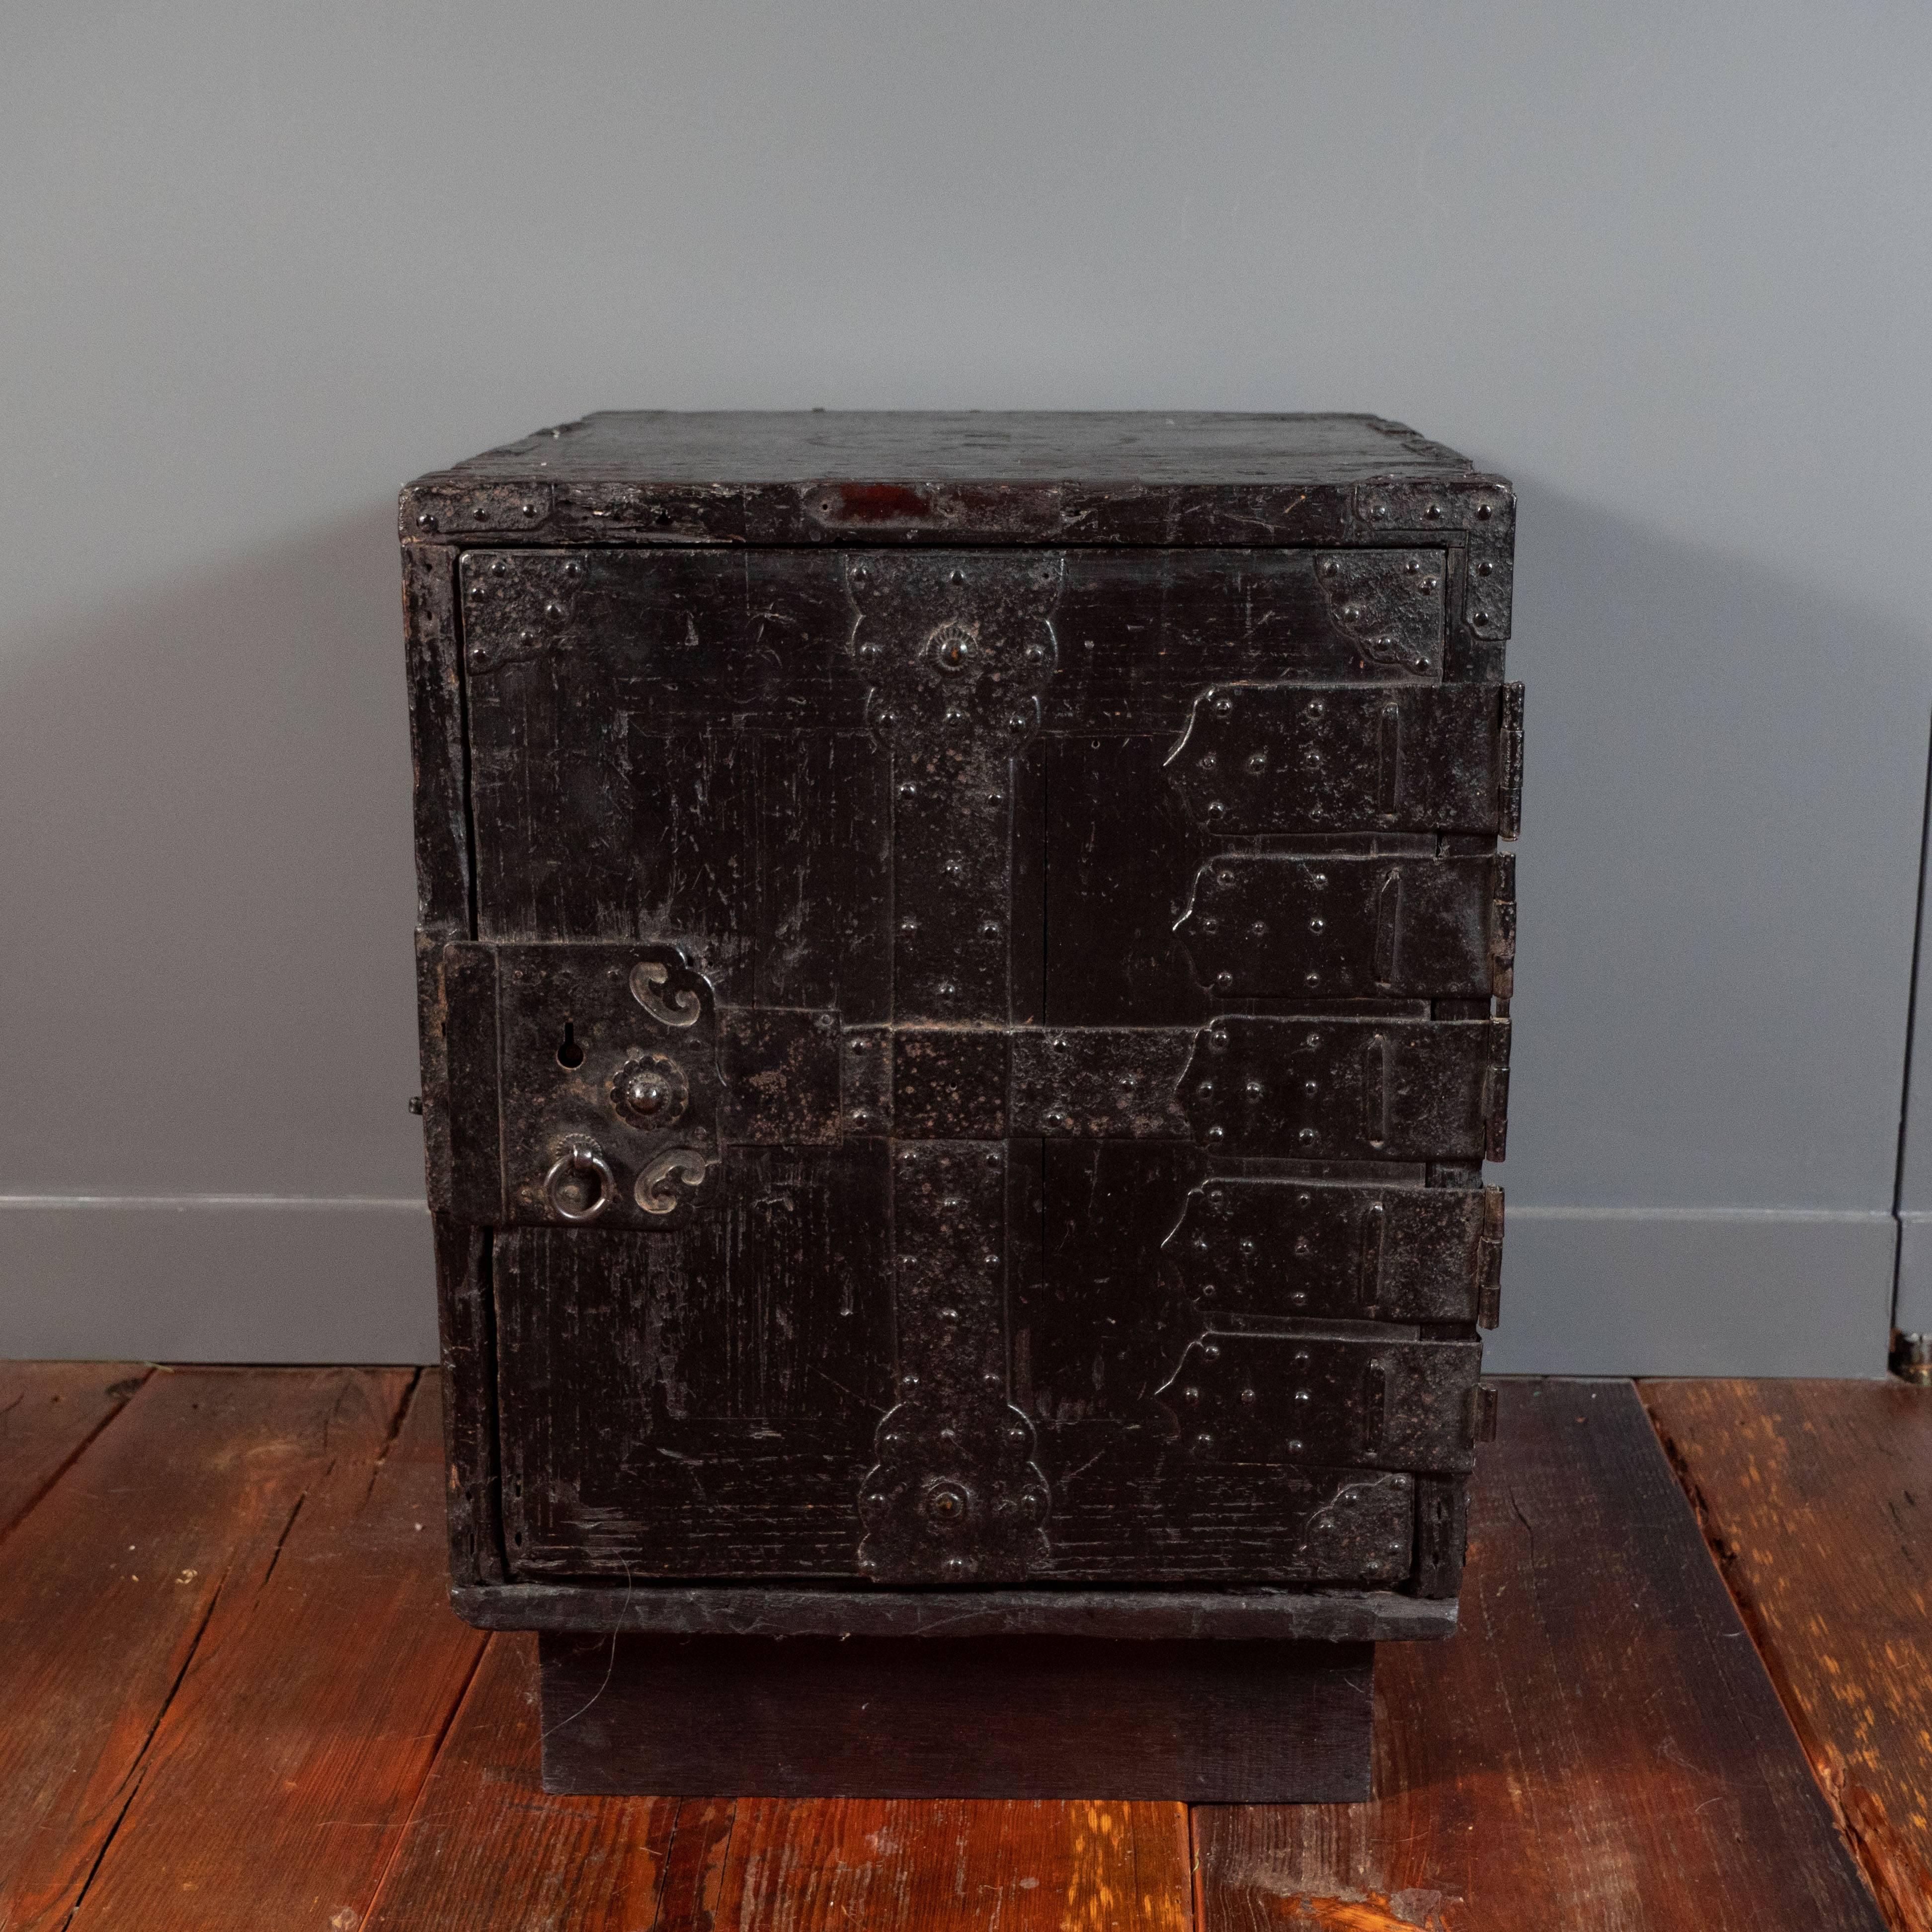 19th century Japanese safe, Meiji period. Early safe also used as a side table in recent times. The original black lacquer and strap hardware. Inside main door reveals small drawers: two missing.